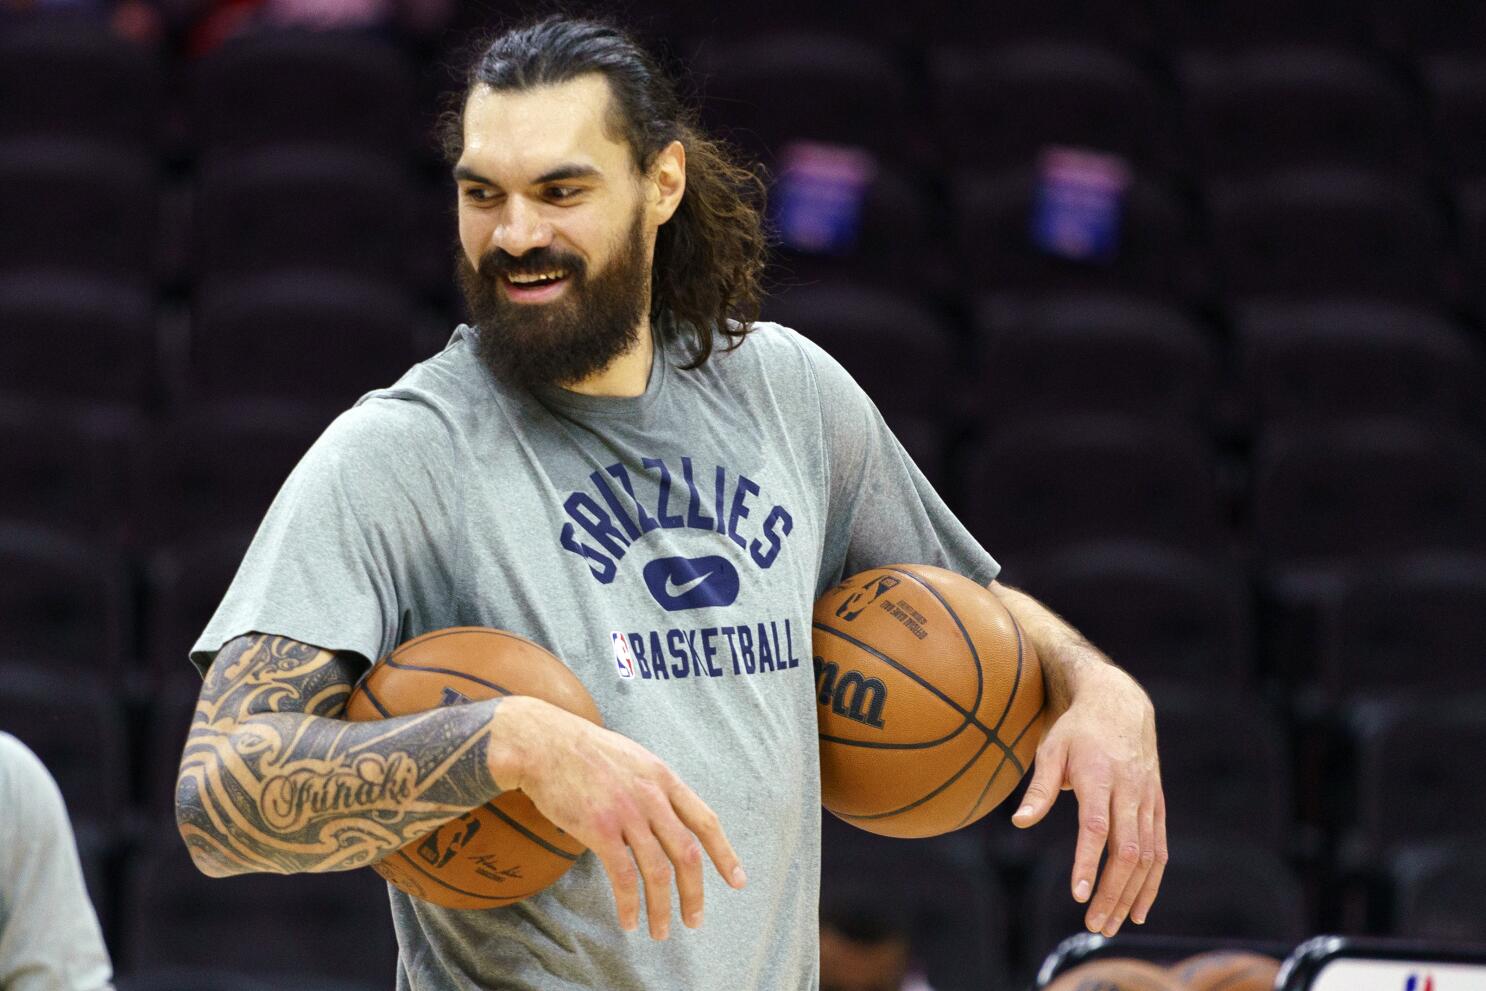 Grizzlies center Steven Adams clears protocols before Game 3 - The